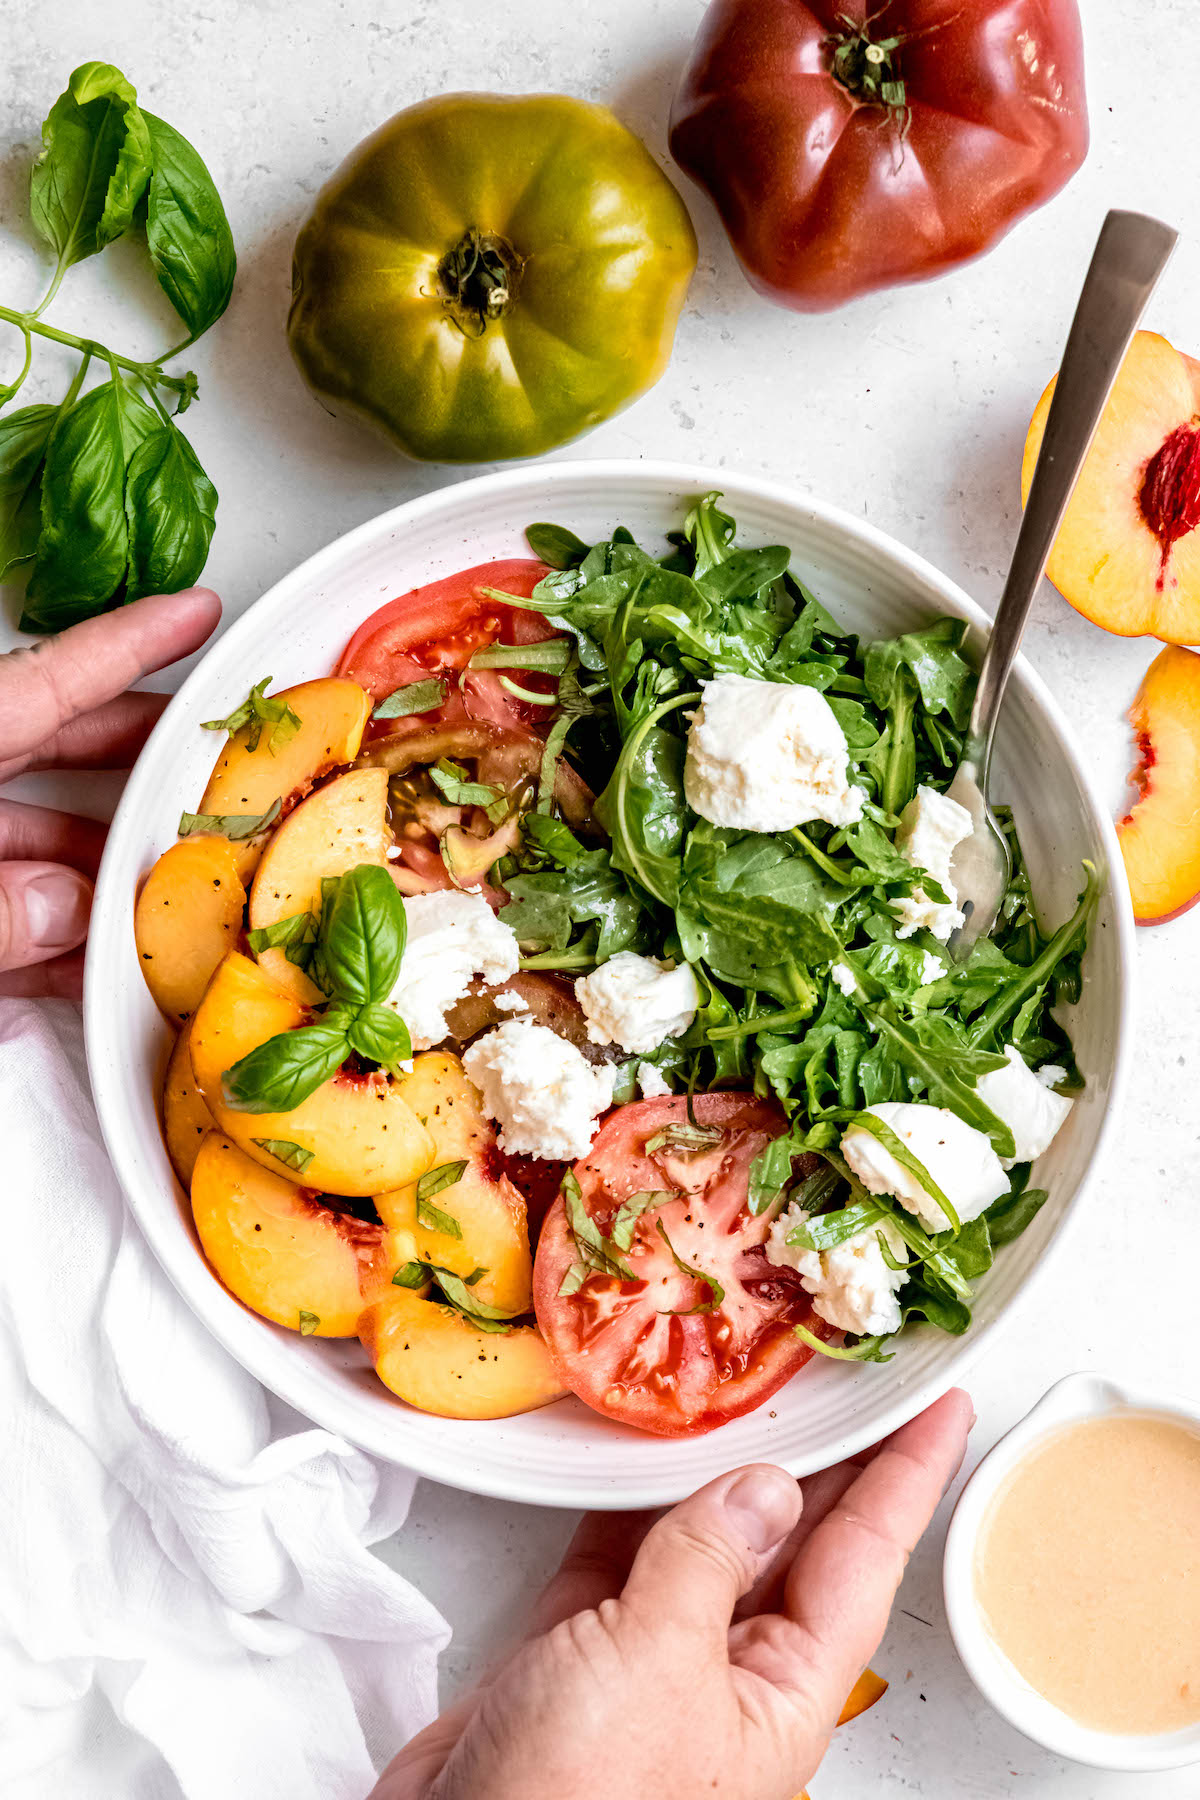 hands grabbing a round white bowl filled with burrata tomato peach caprese salad on a white table with heirloom tomatoes, fresh basil sprigs, sliced peaches, and a small carafe of homemade white balsamic vinaigrette.